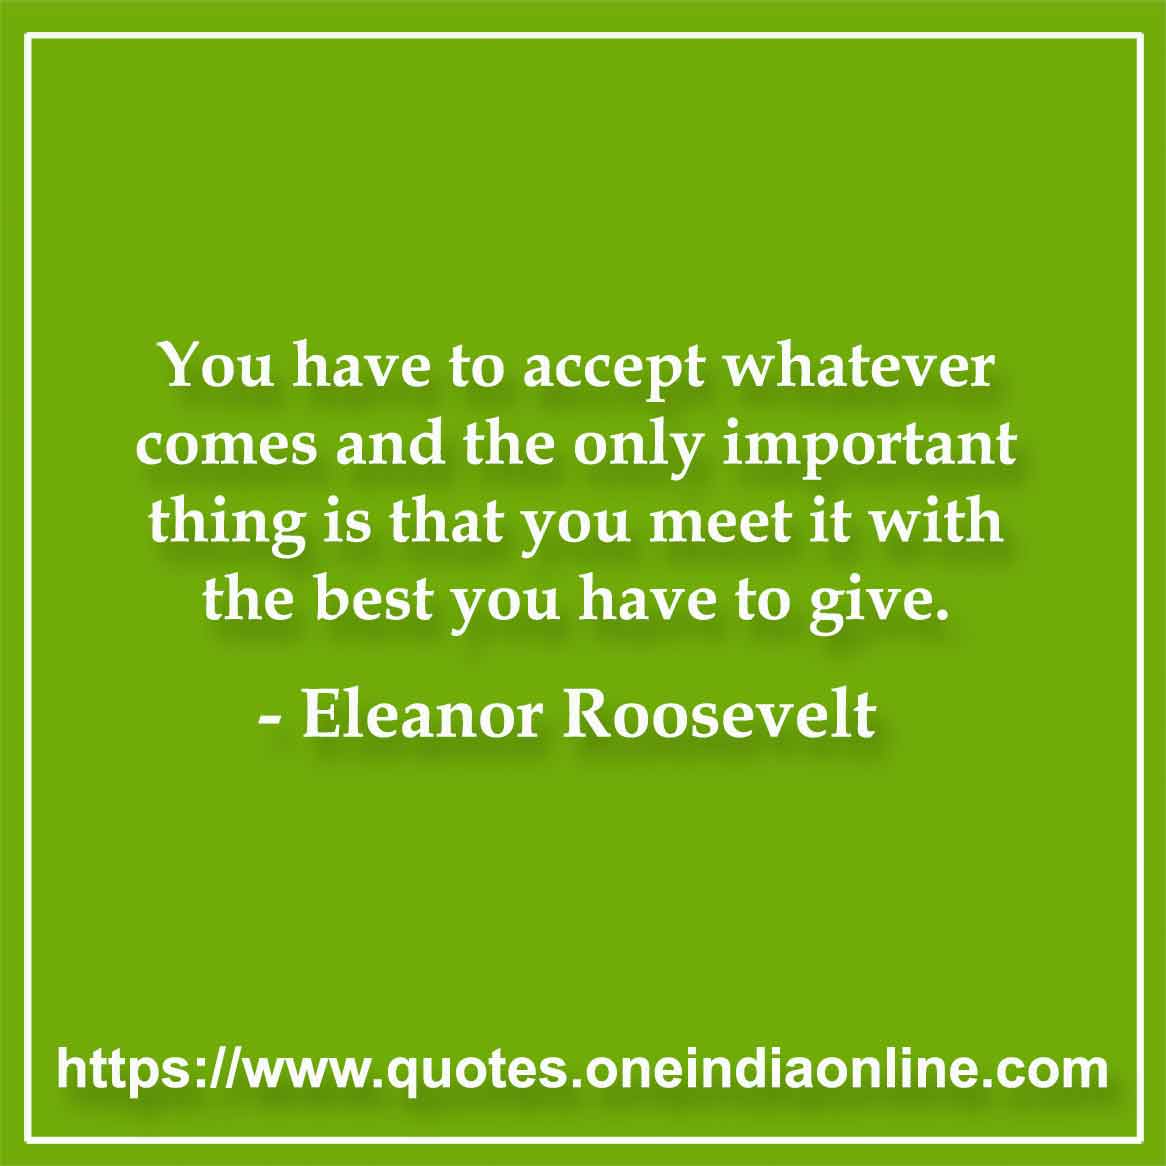 You have to accept whatever comes and the only important thing is that you meet it with the best you have to give.

-  Eleanor Roosevelt